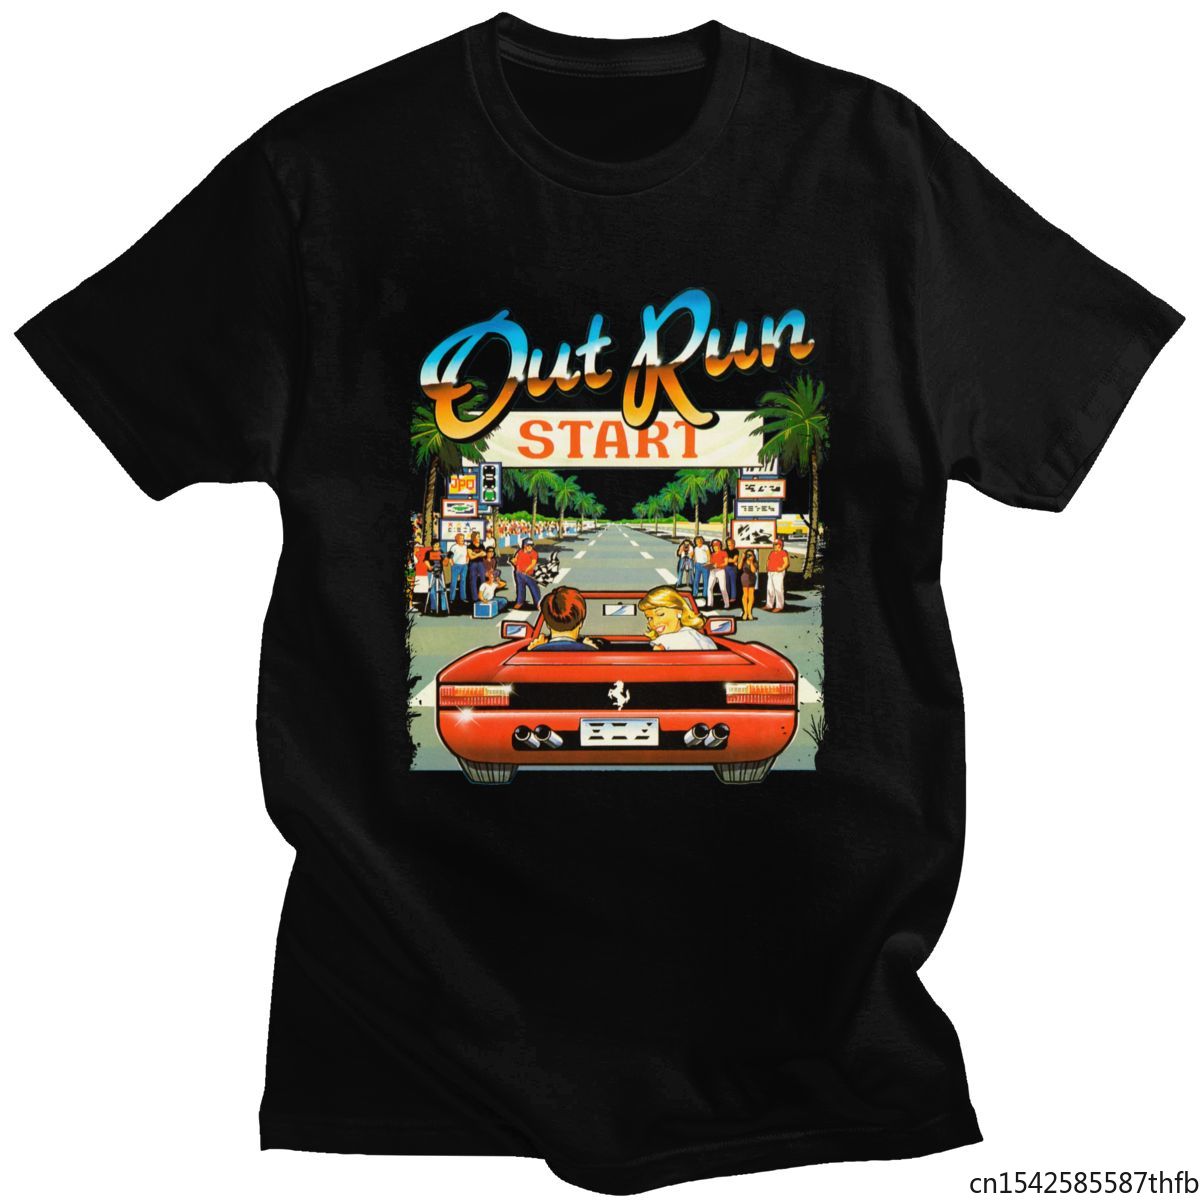 Arcade Racing Video Game Out Run T Shirt Men Short Sleeve Vintage 80s Console Gaming T